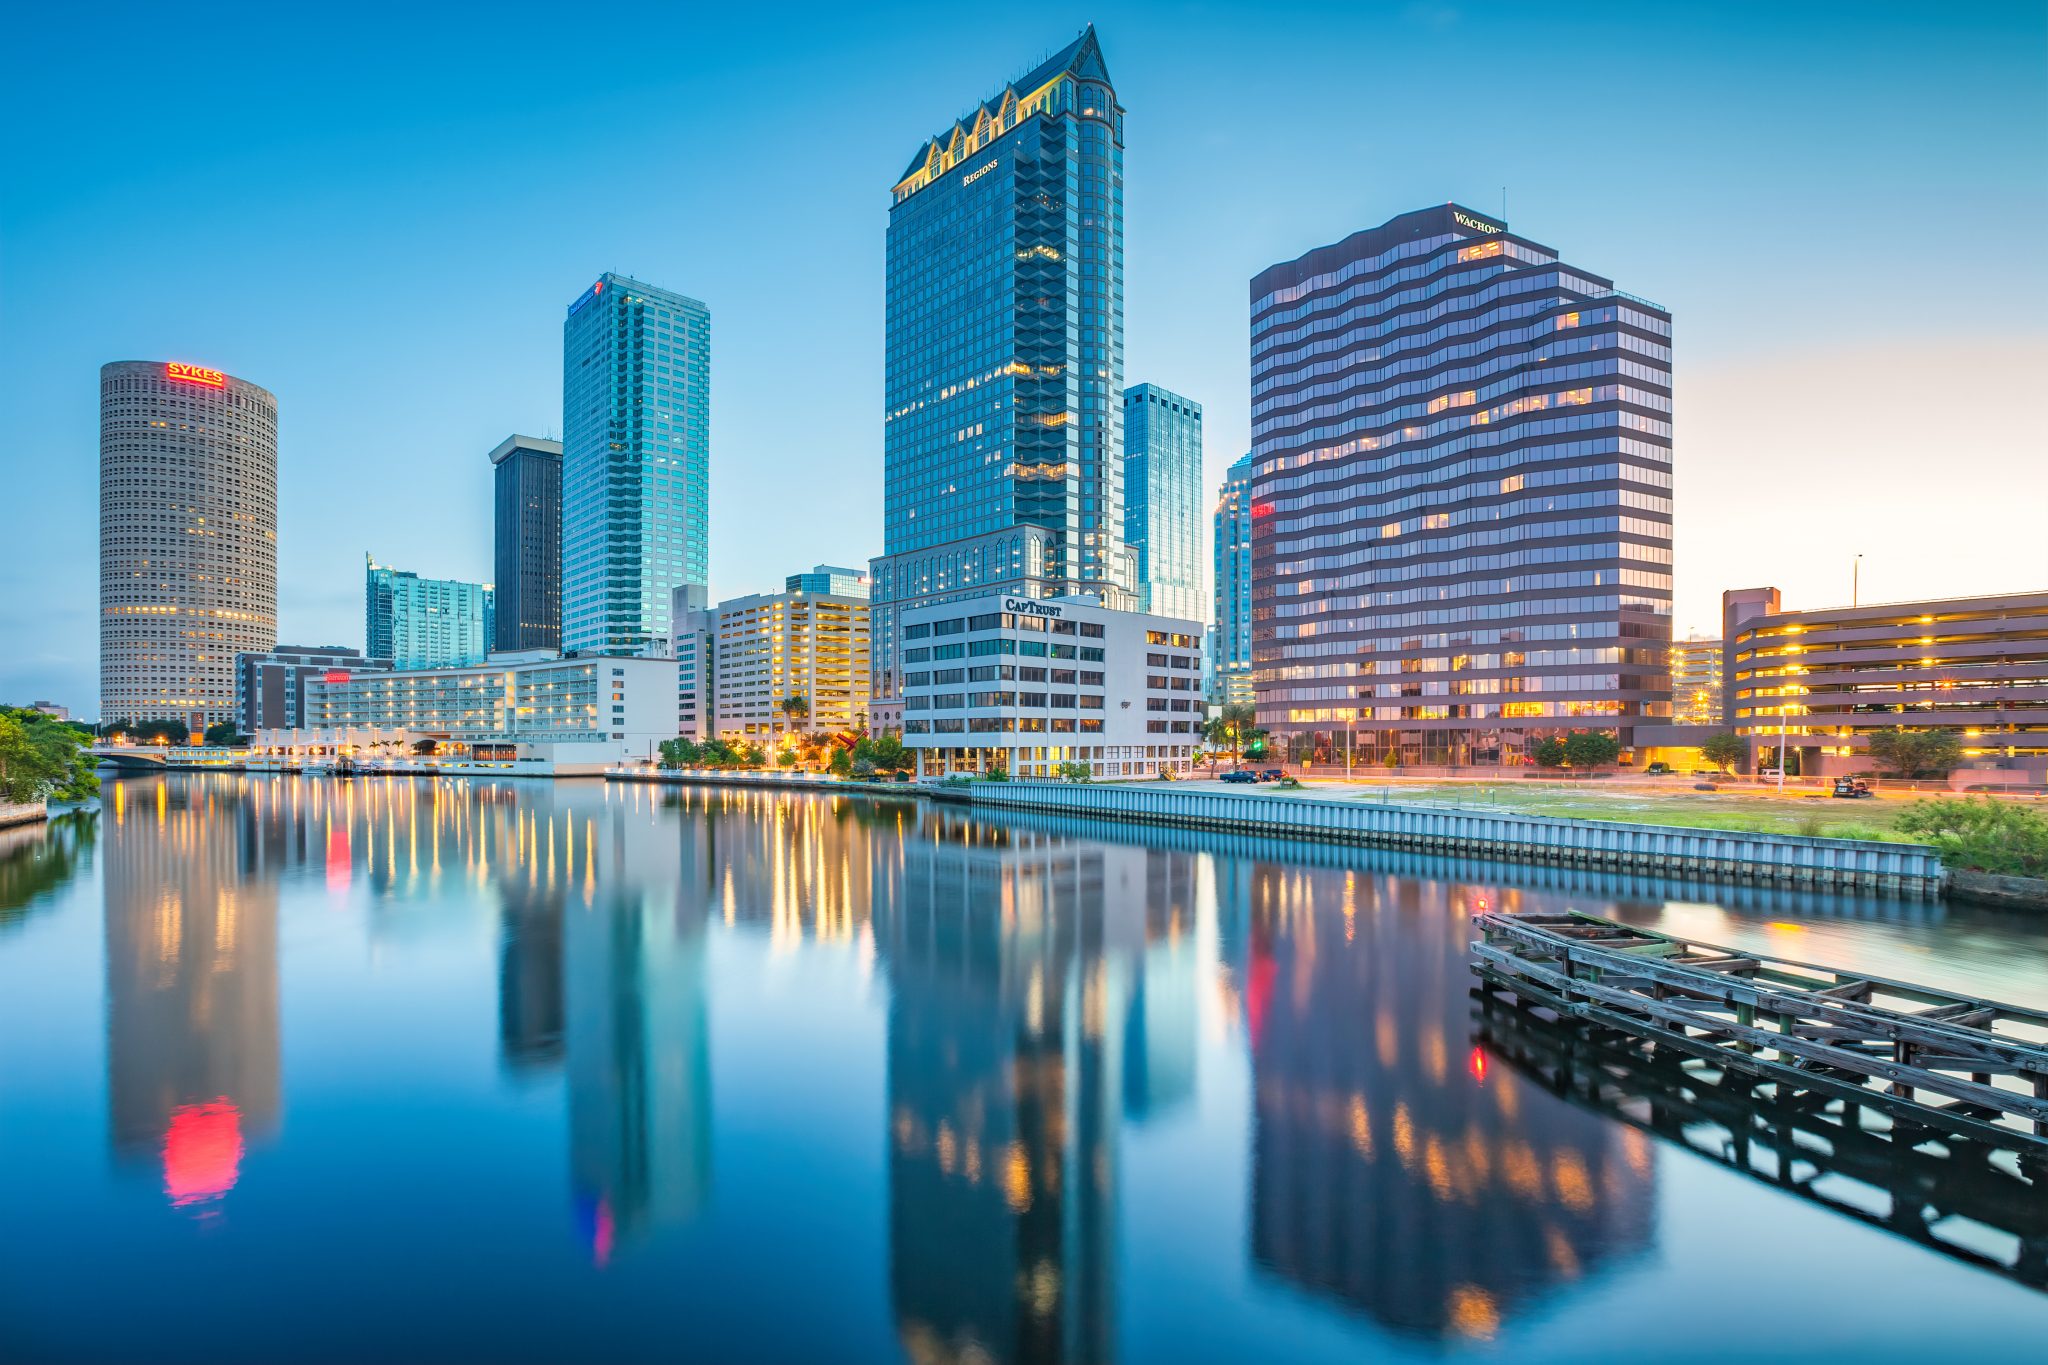 places to visit in downtown tampa